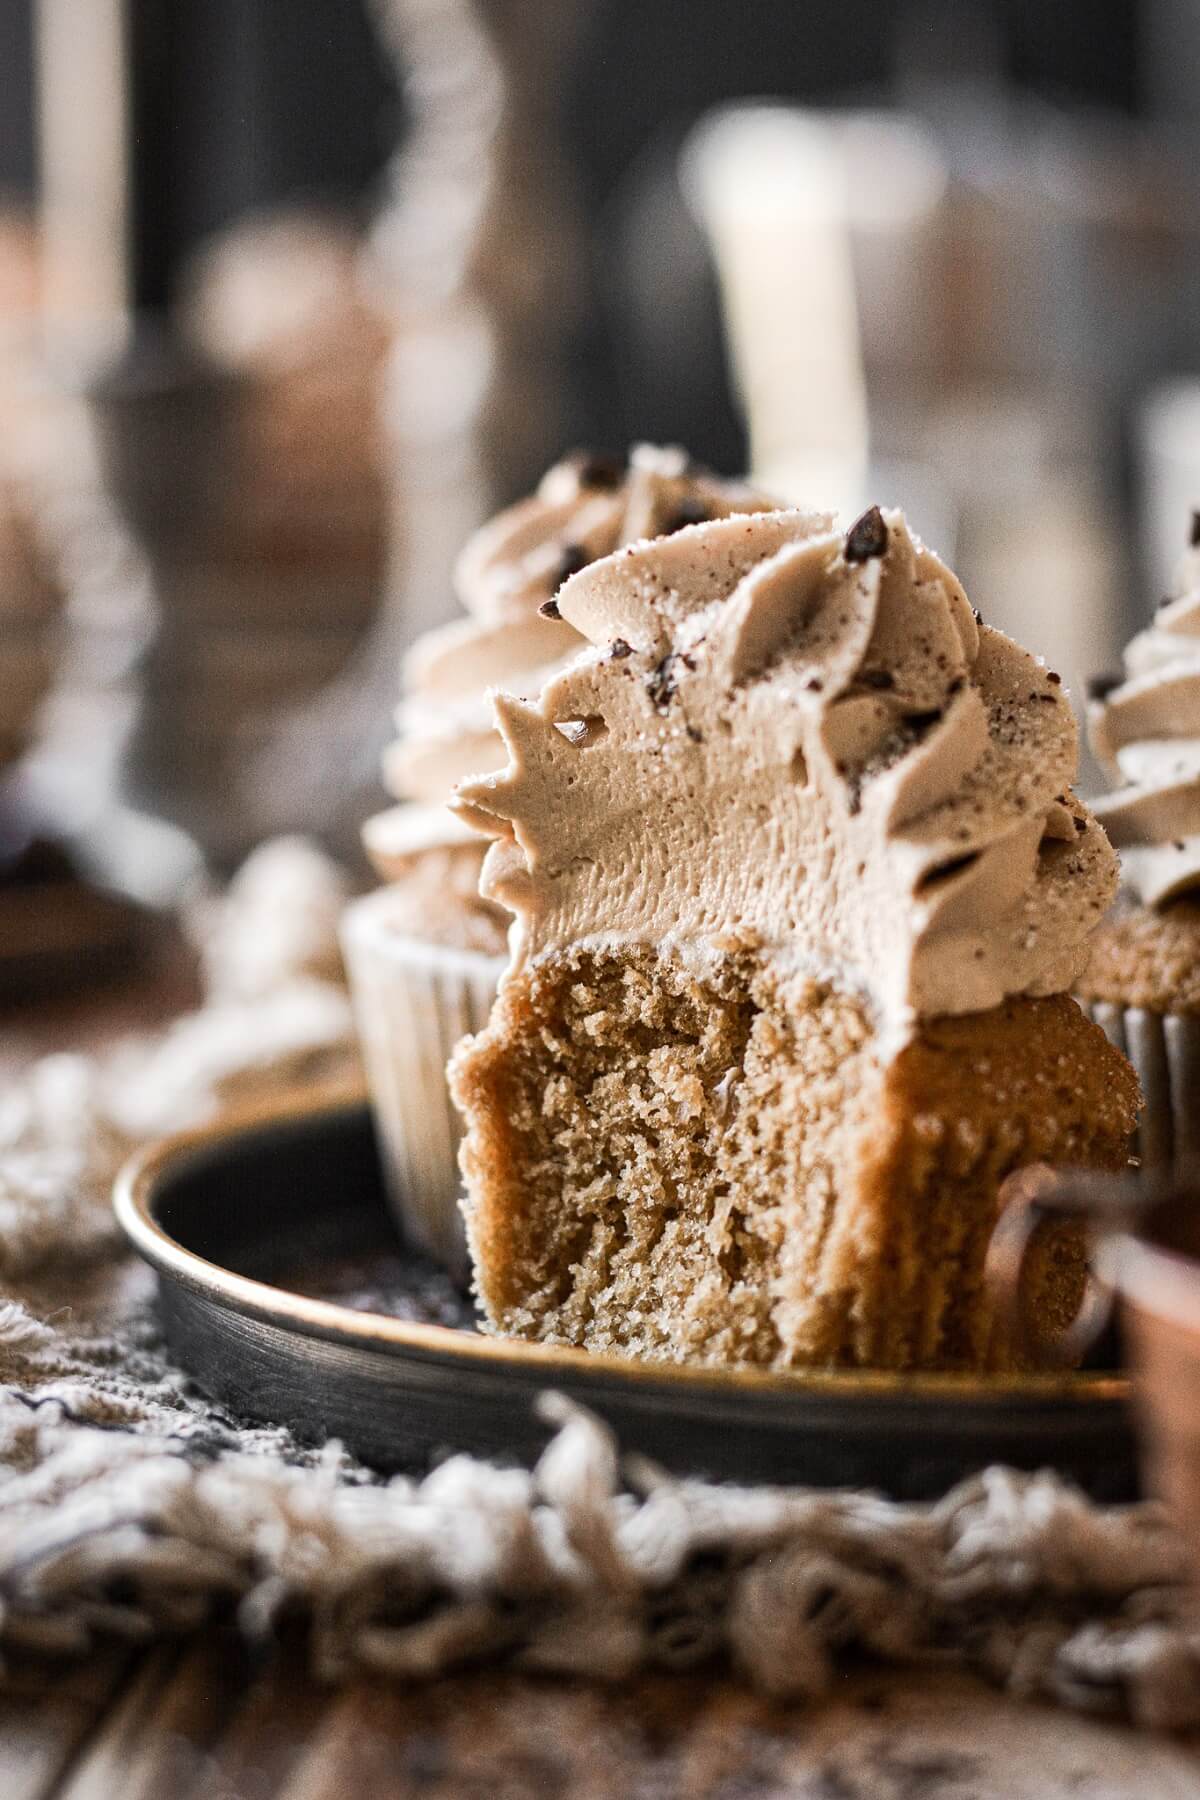 Coffee cupcake with a bite taken.